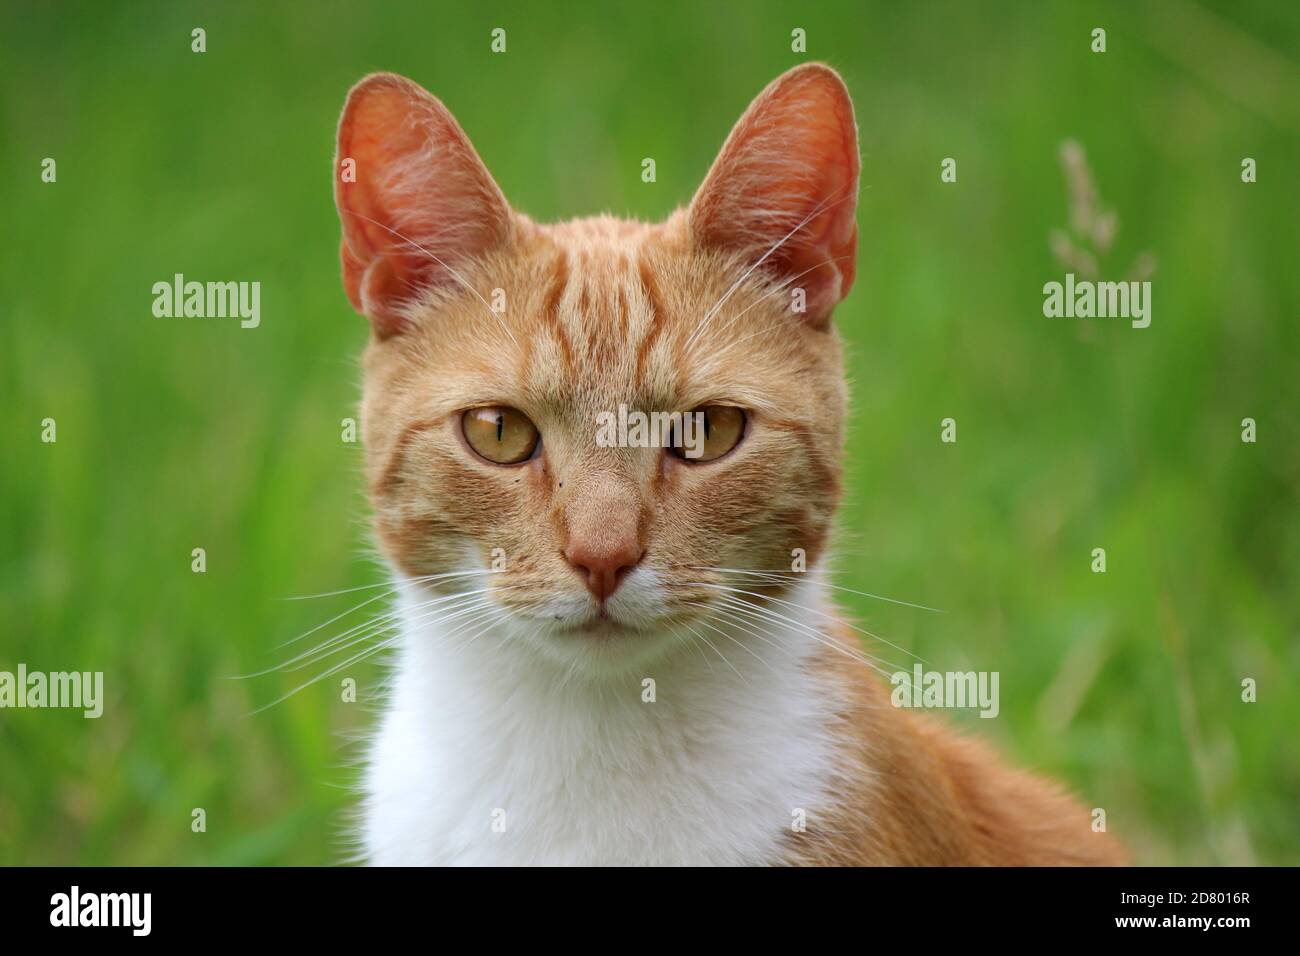 Portrait of cute ginger cat. Green grass background. Summer outdoor photo. Stock Photo